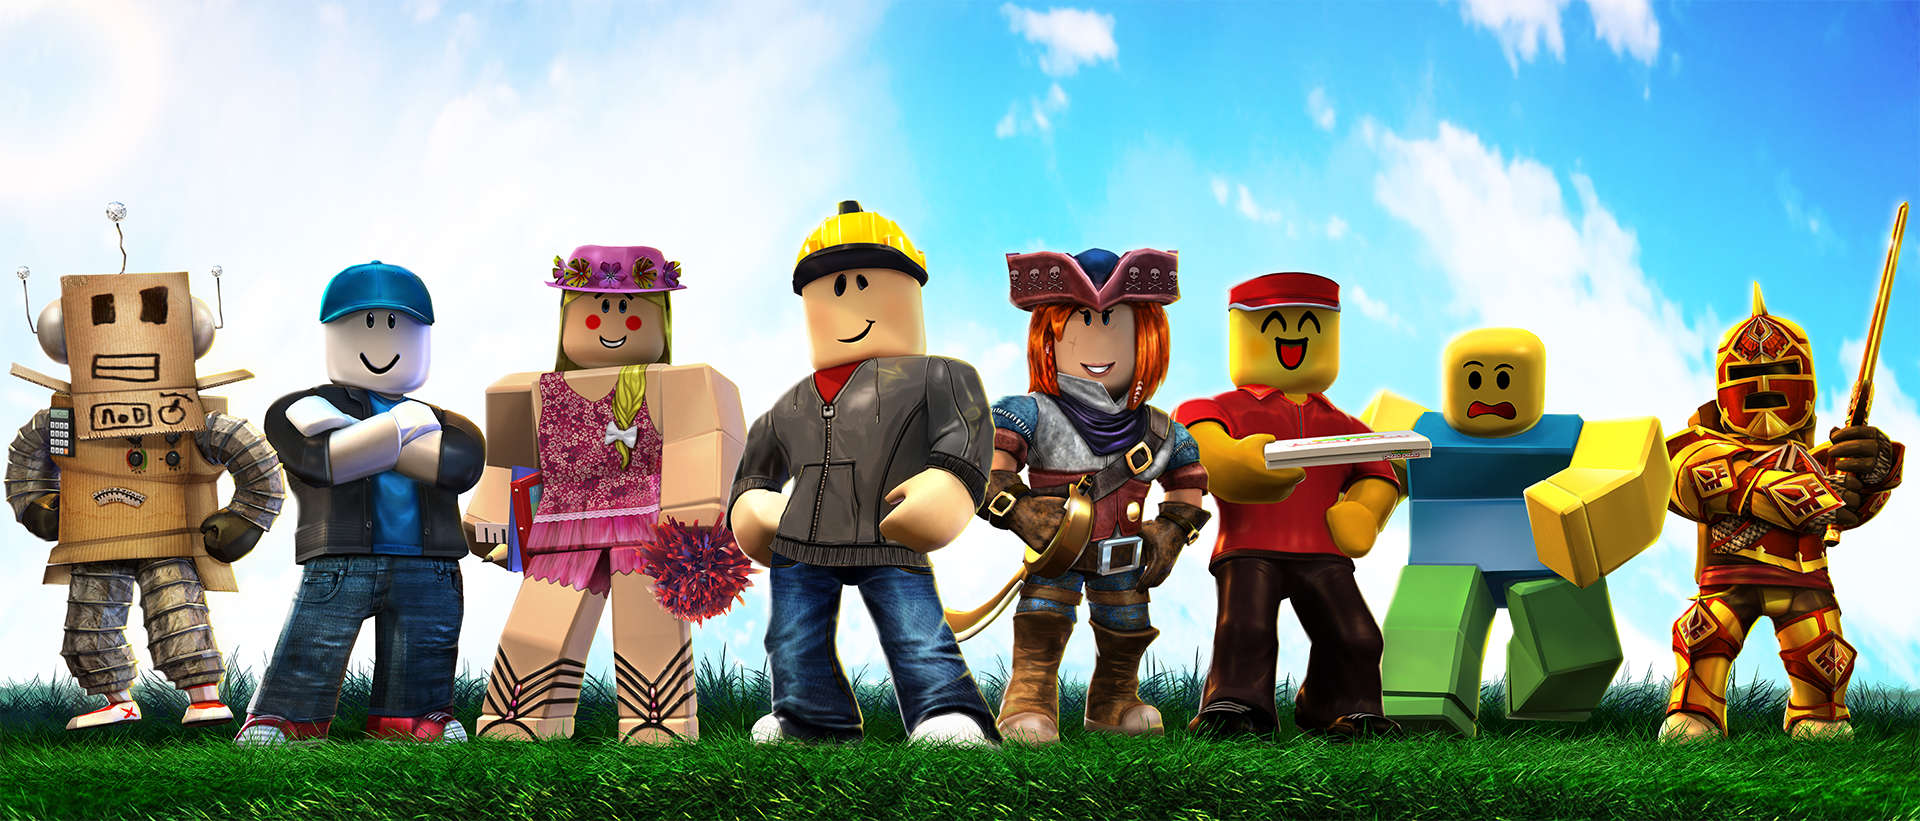 Roblox Raises 150 Million In Funding Is Now Reportedly Worth 2 5 Billion - online 150m late venture 4b roblox